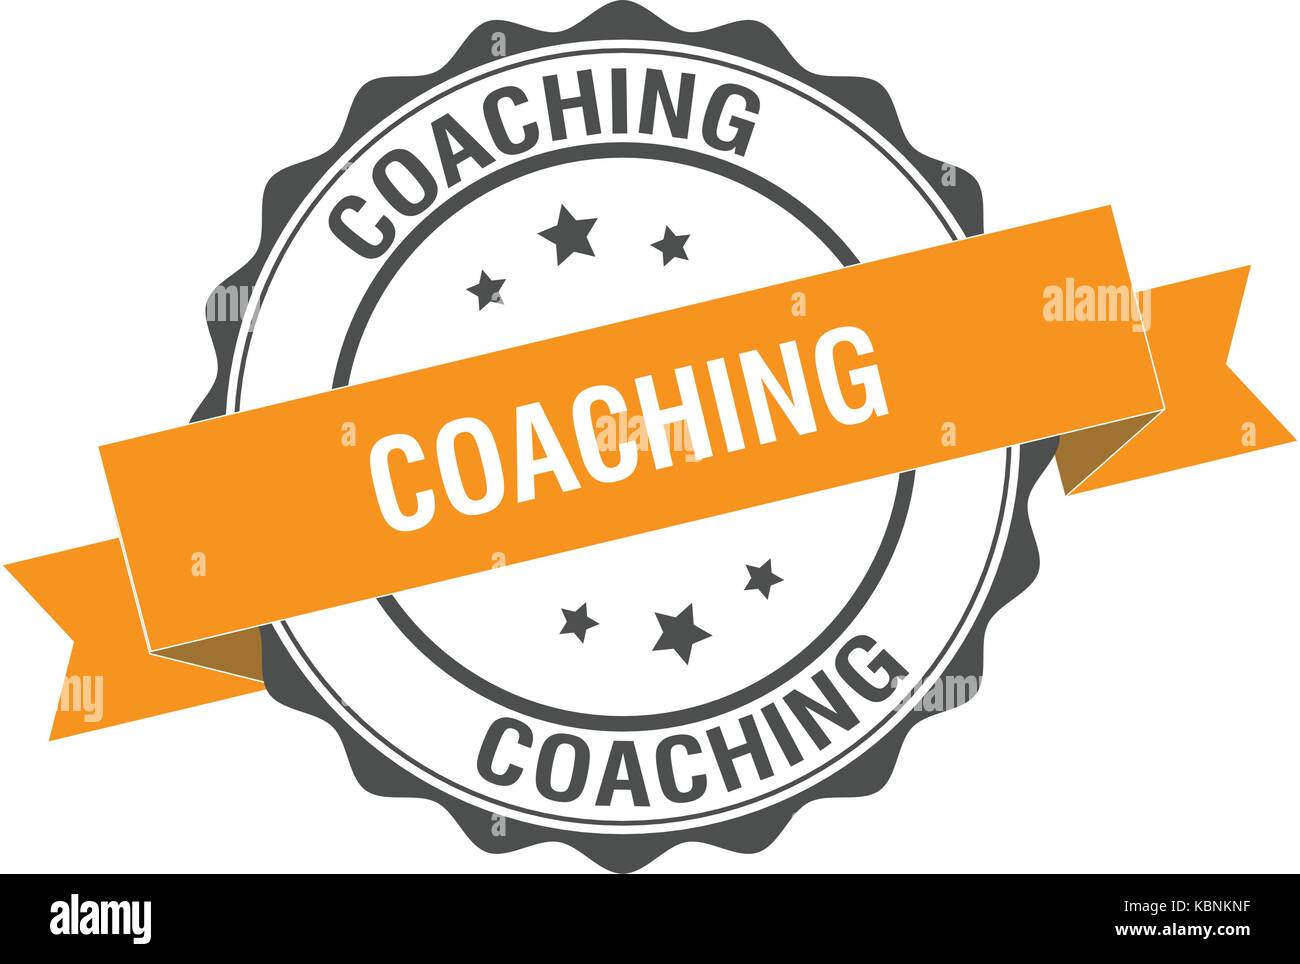 Coaching stamp illustration Stock Vector